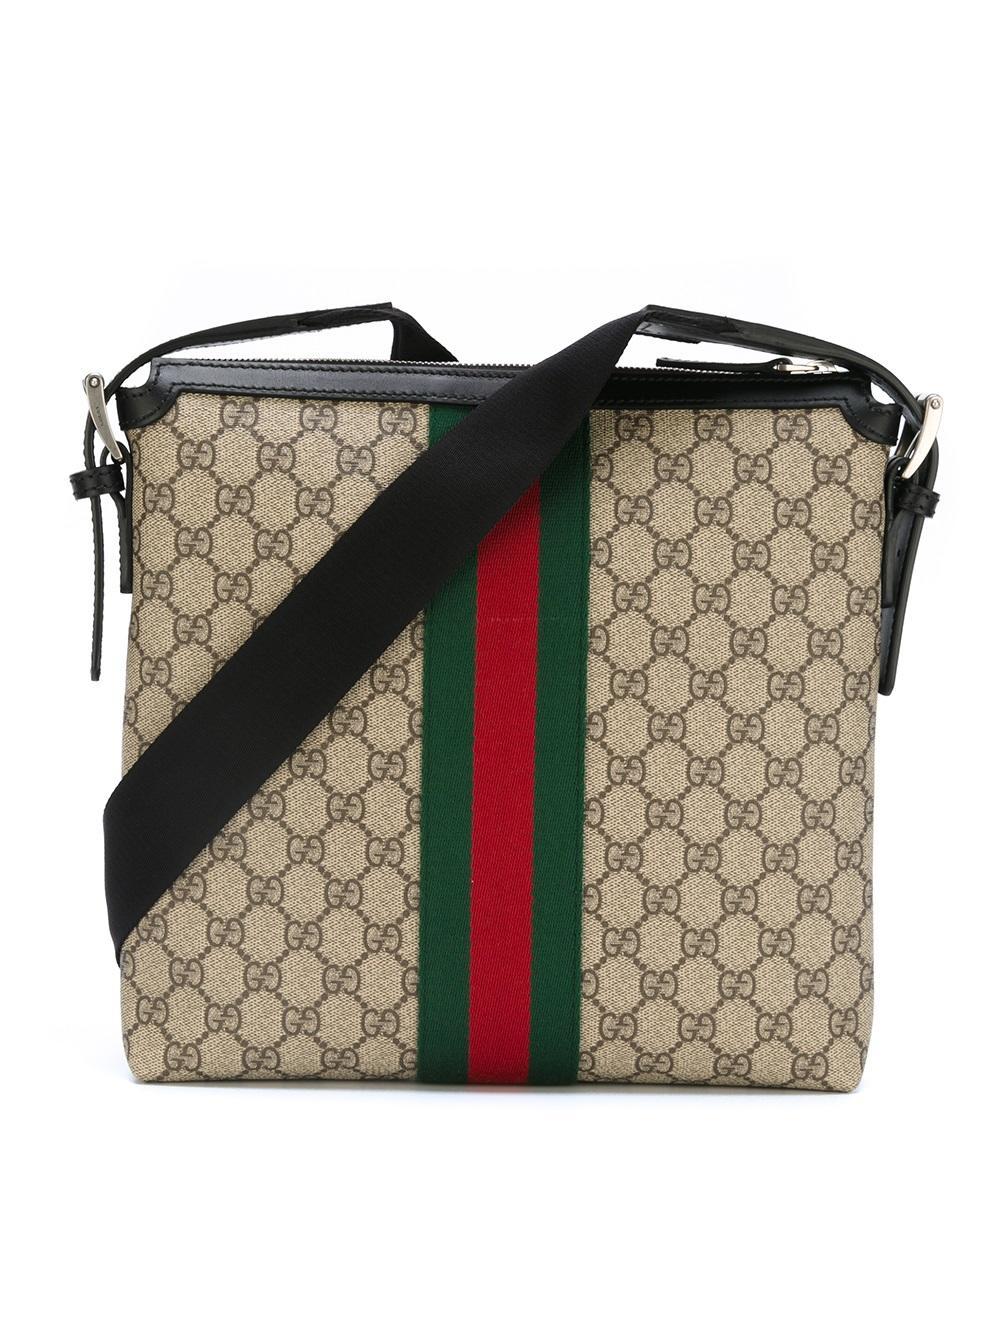 Gucci Bags Official Website Uk | Confederated Tribes of the Umatilla Indian Reservation